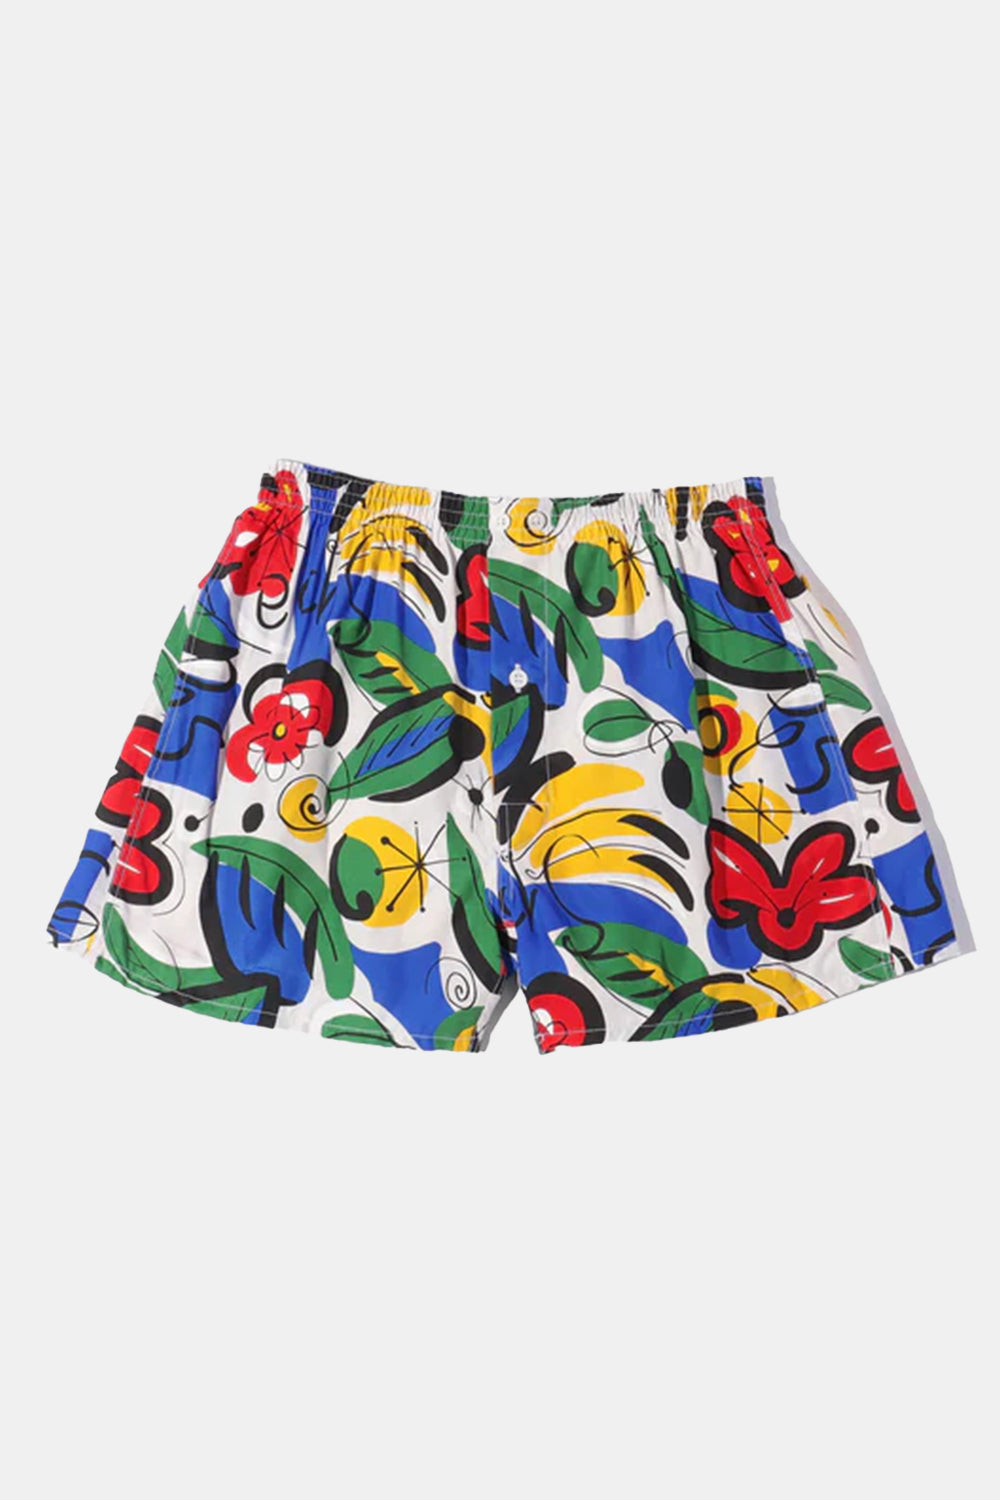 Anonymous Ism Rayon Ette Flower Pattern Boxers - Blue/Green/Yellow | Number Six